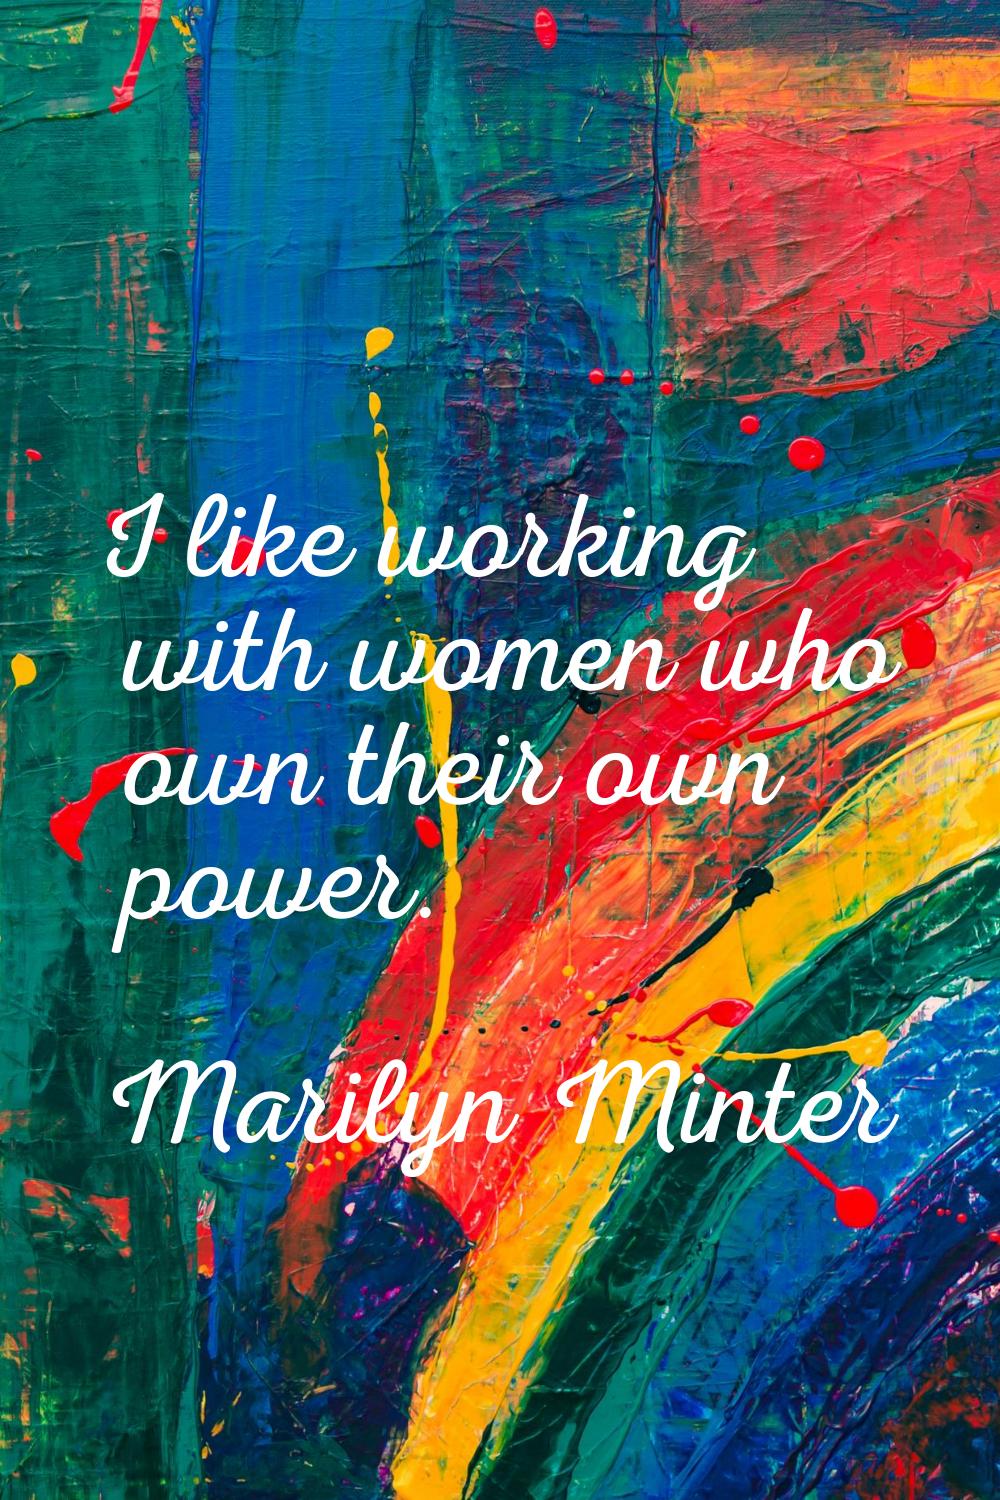 I like working with women who own their own power.